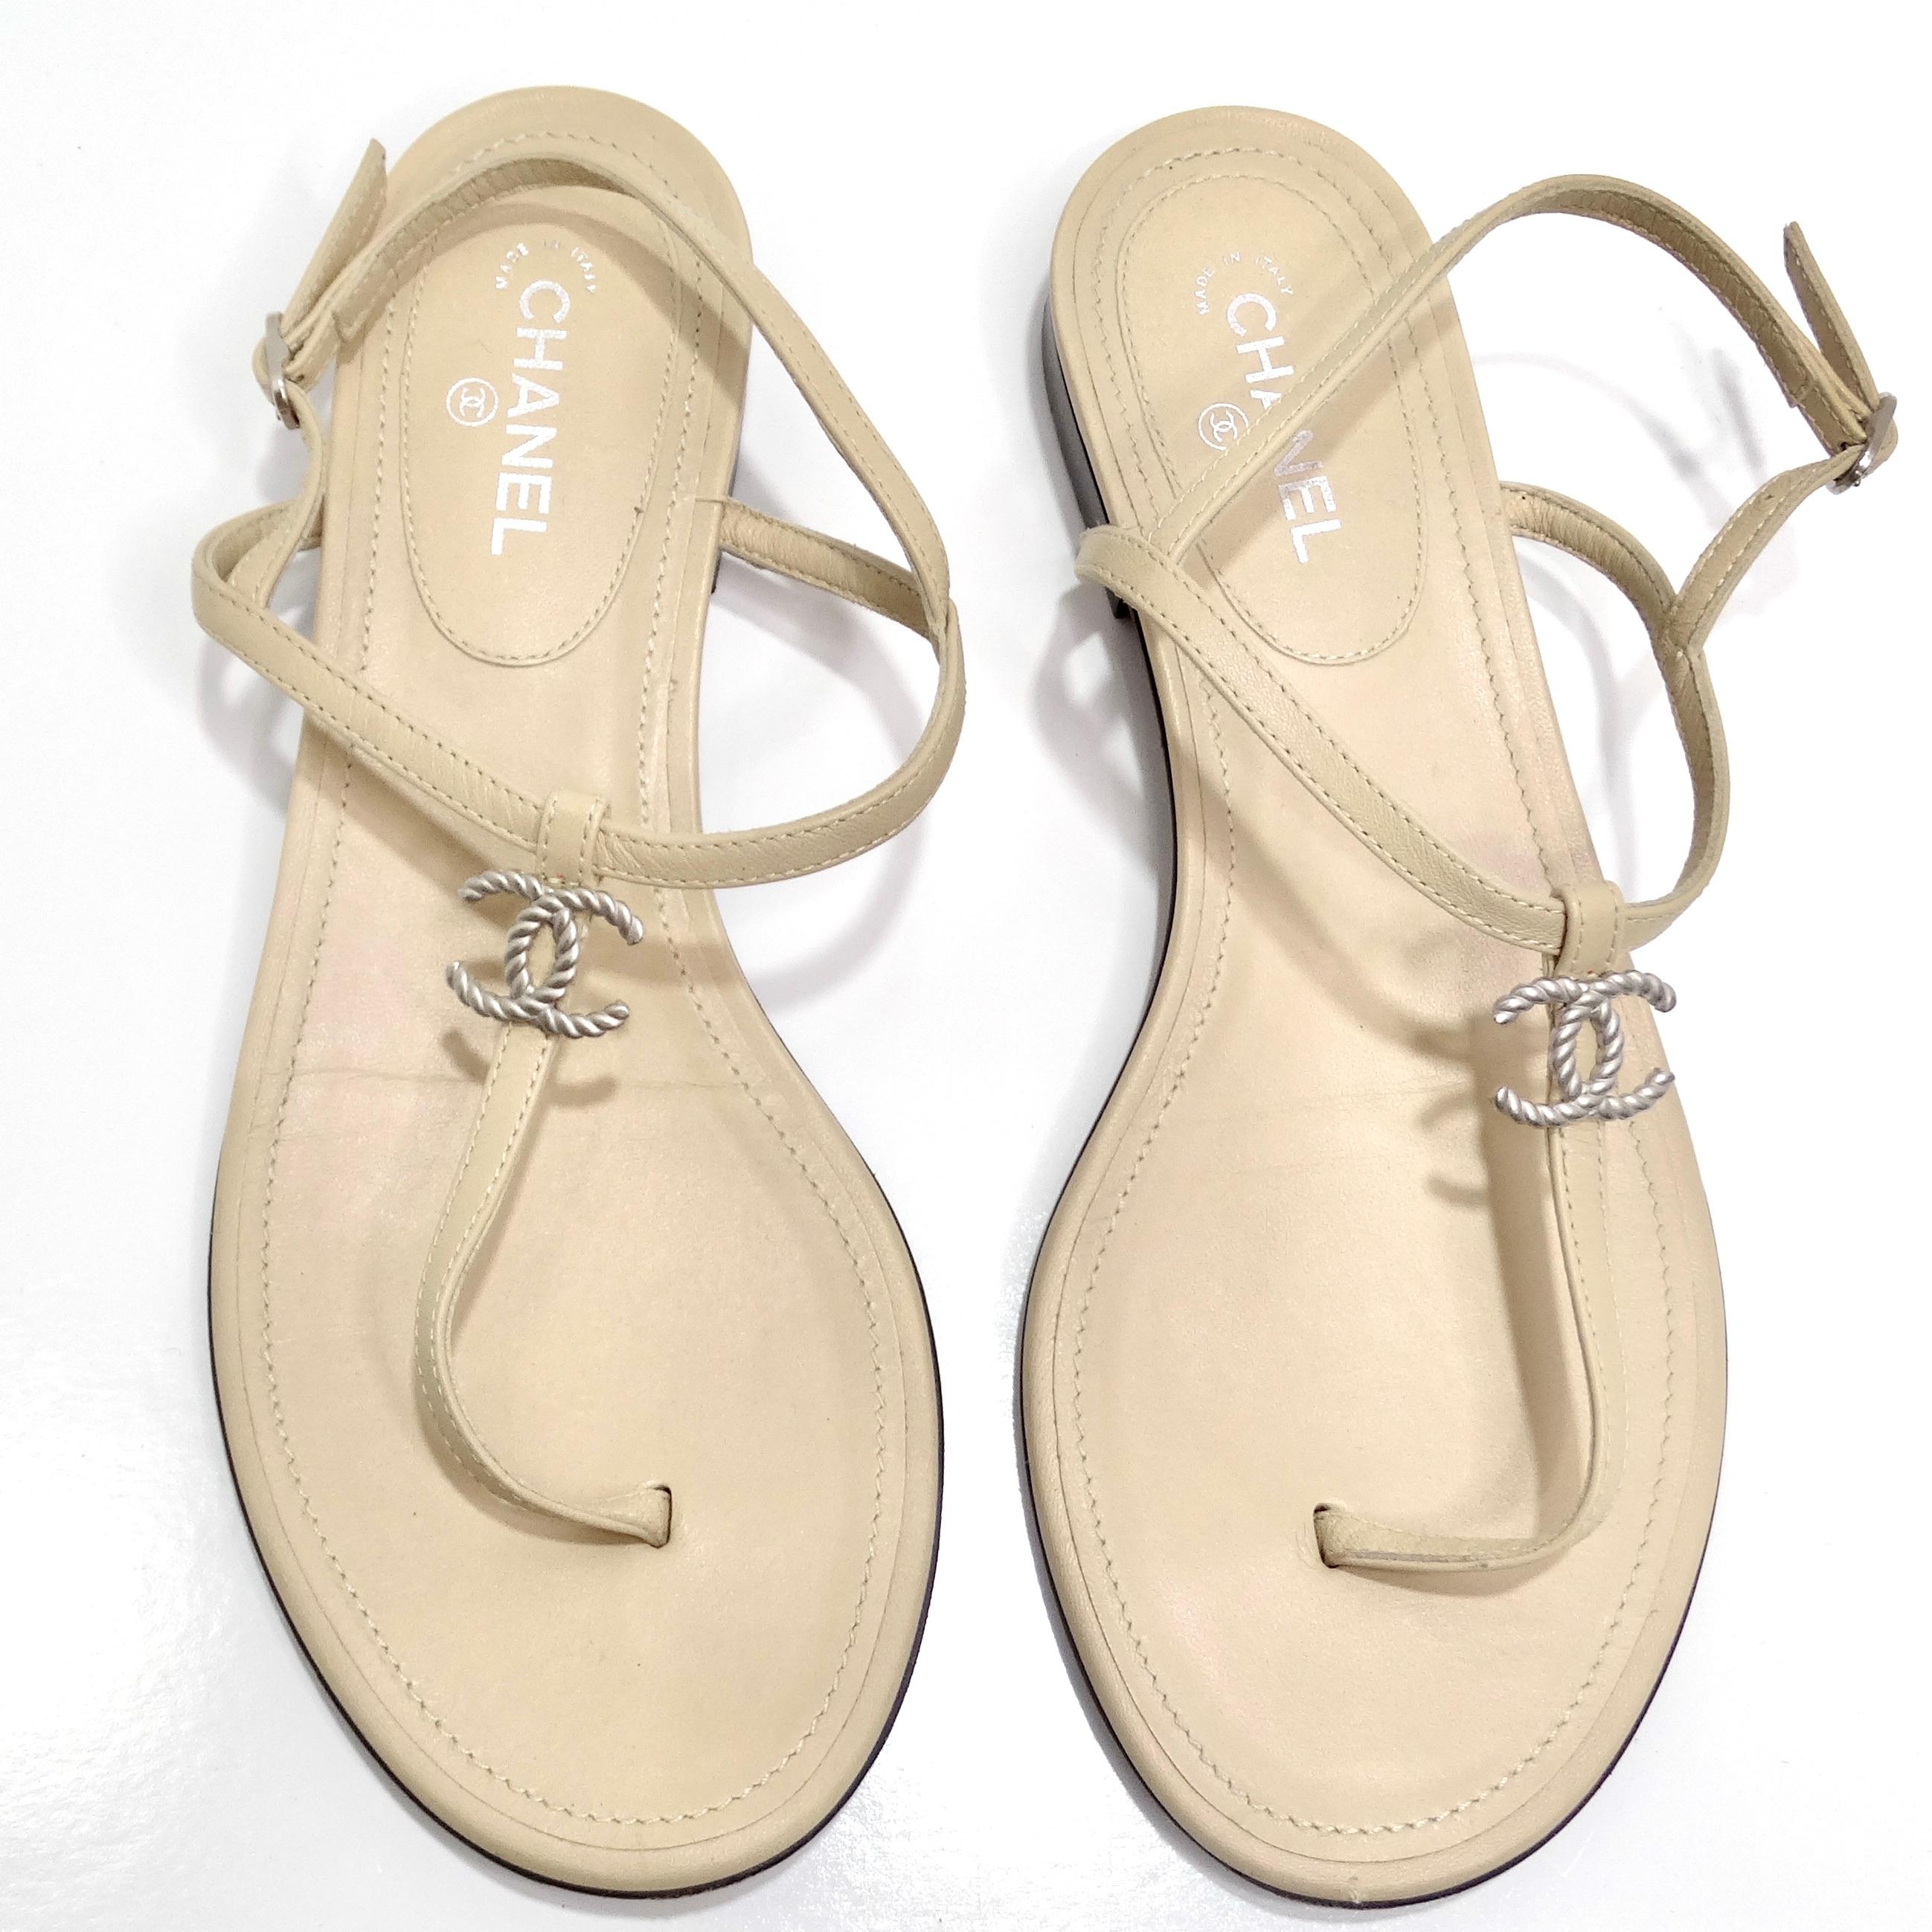 Introducing the timeless elegance of Chanel CC T Strap Leather Sandals, a classic and versatile addition to your footwear collection. Crafted from luxurious beige leather, these strappy sandals feature a T-strap style design that exudes